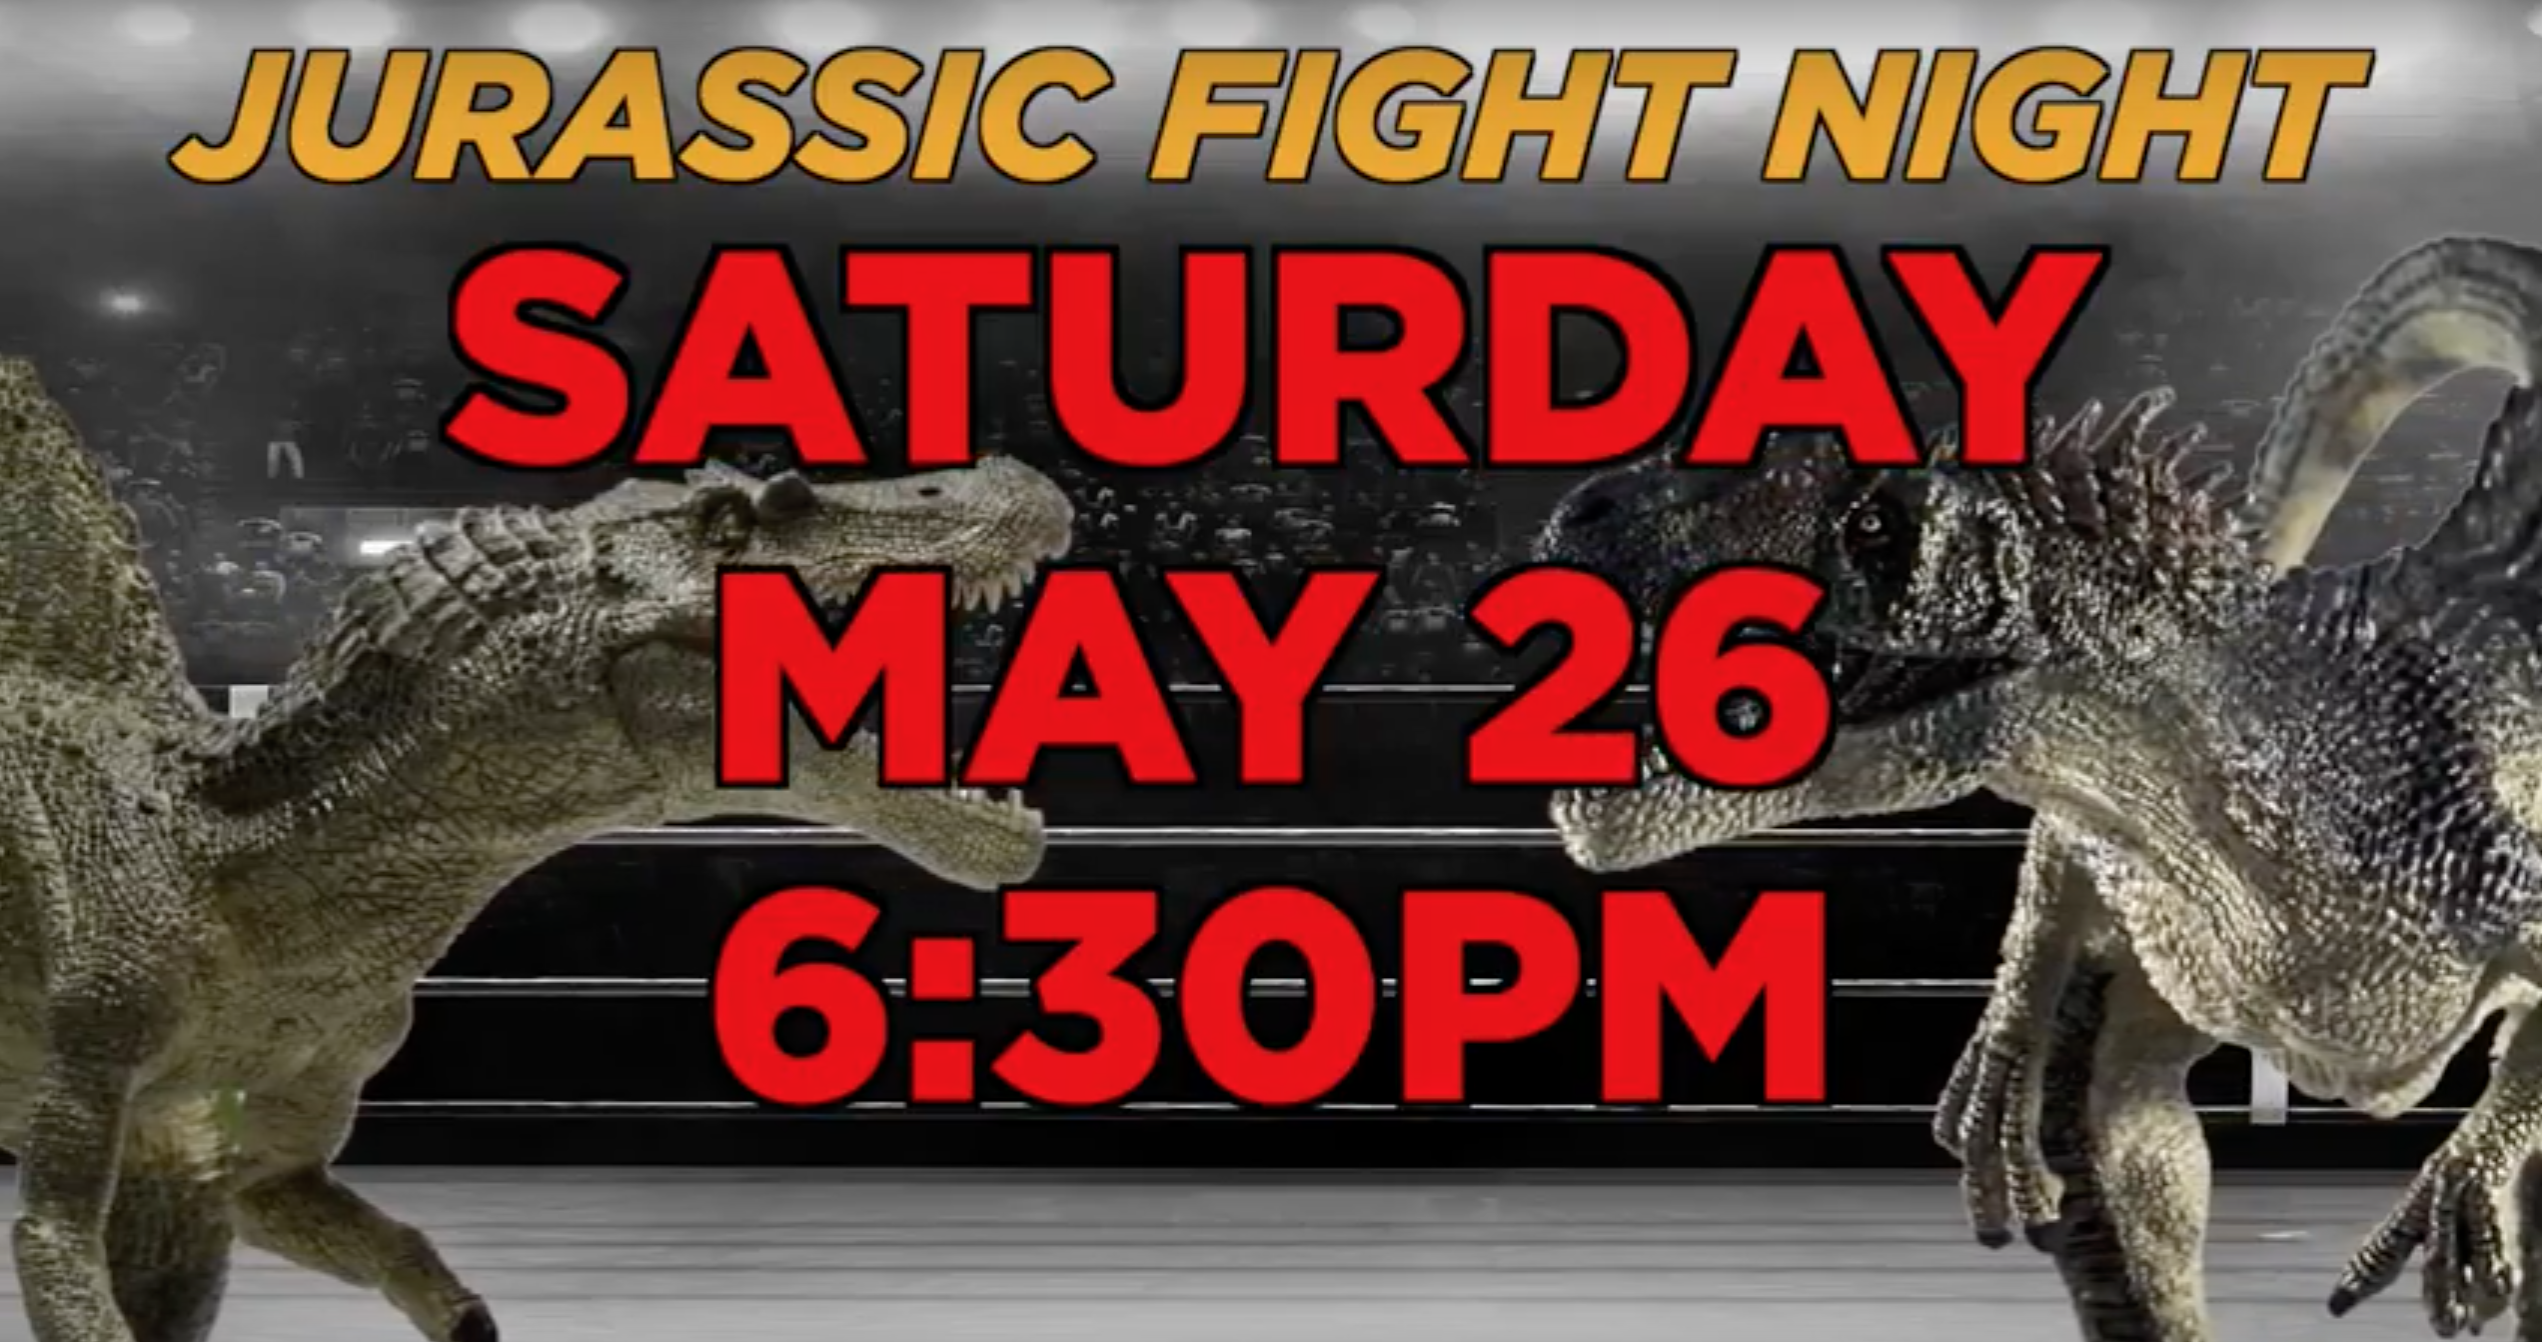 Pangaea Land of the Dinosaurs is hosting their very first Jurassic Fight Night Saturday, May 26, 2018!